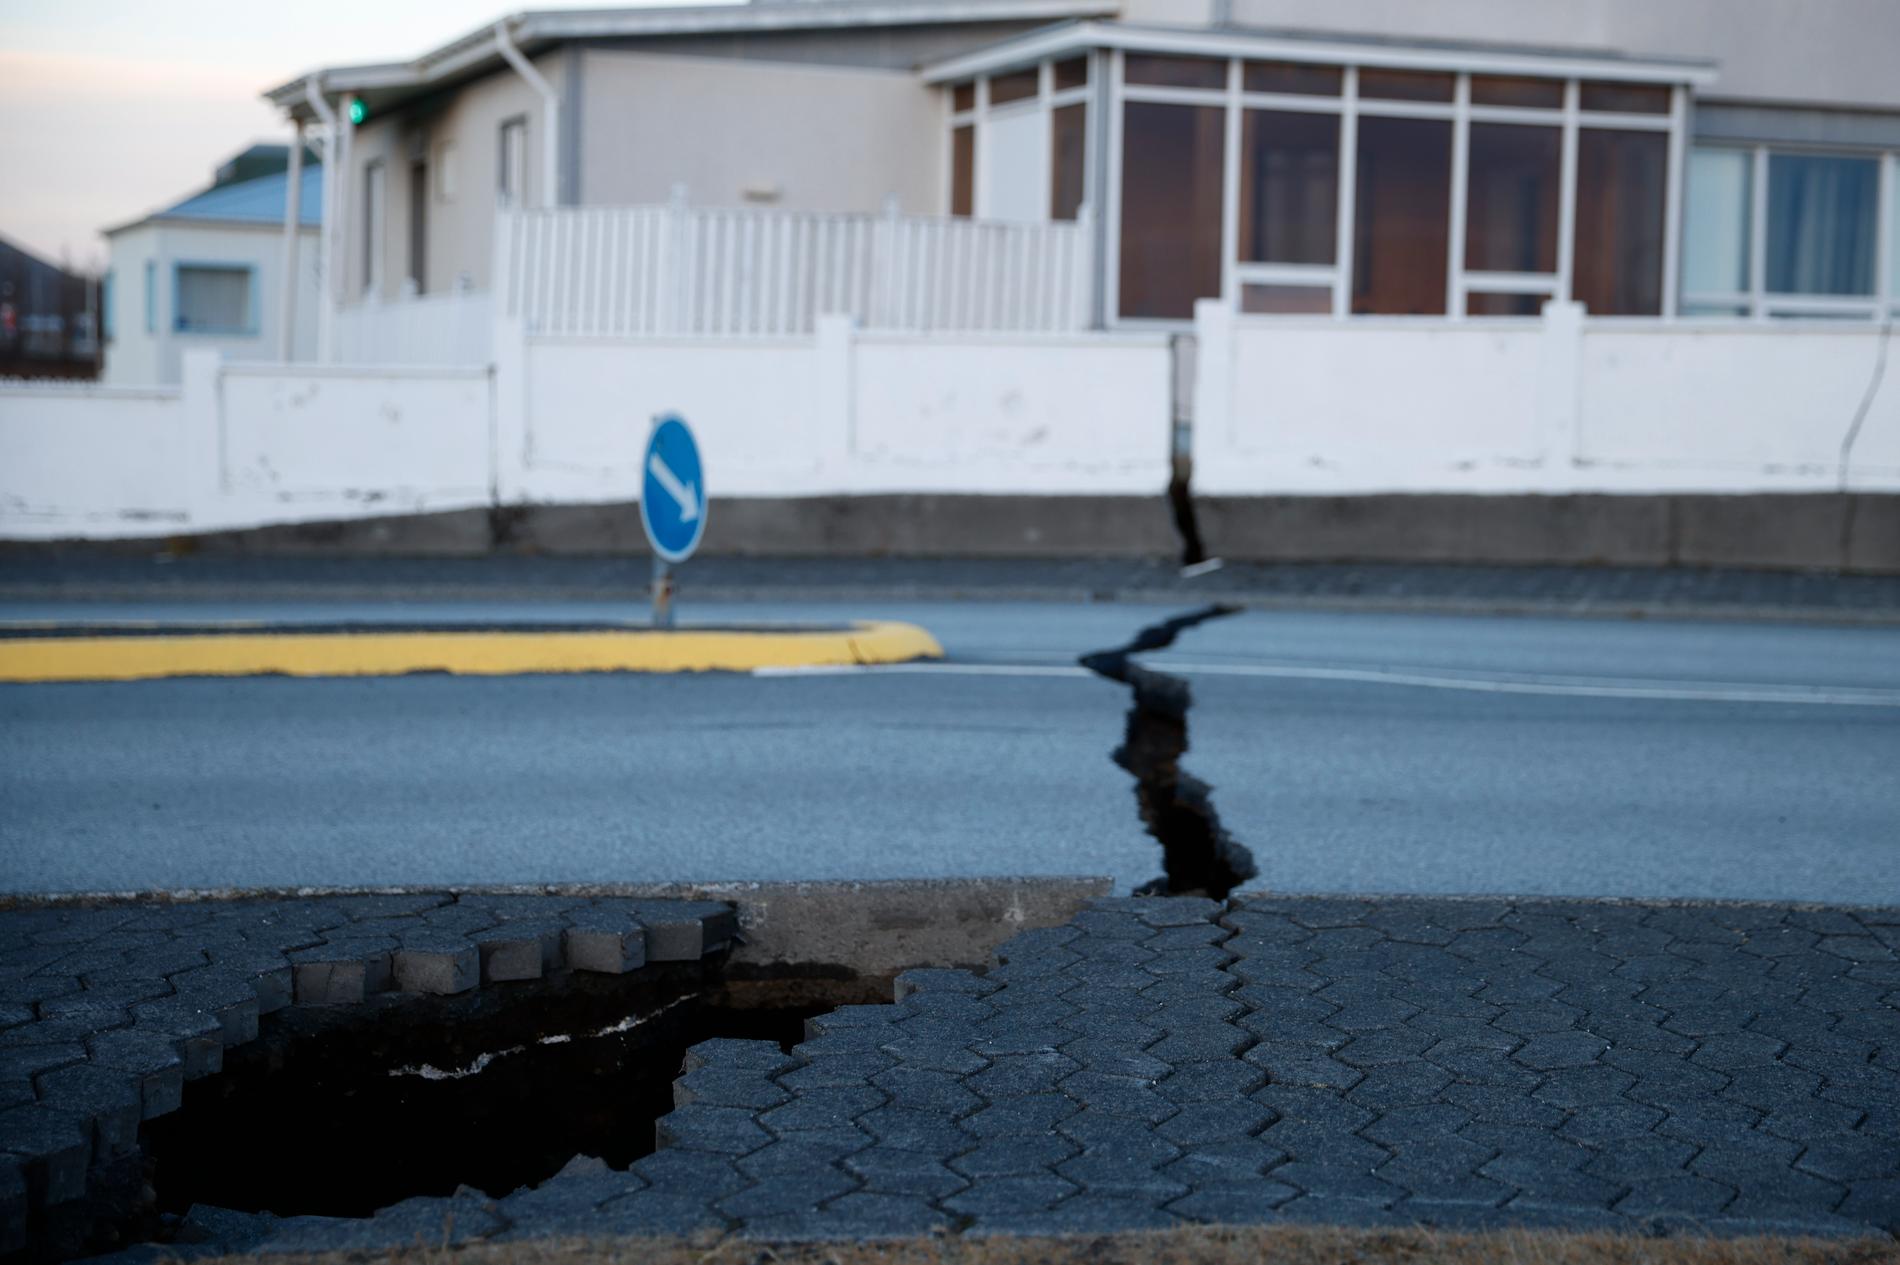 Destruction: The town of Grindavík has suffered severe damage in recent days.  It is still uncertain whether there will be a volcanic eruption or not.